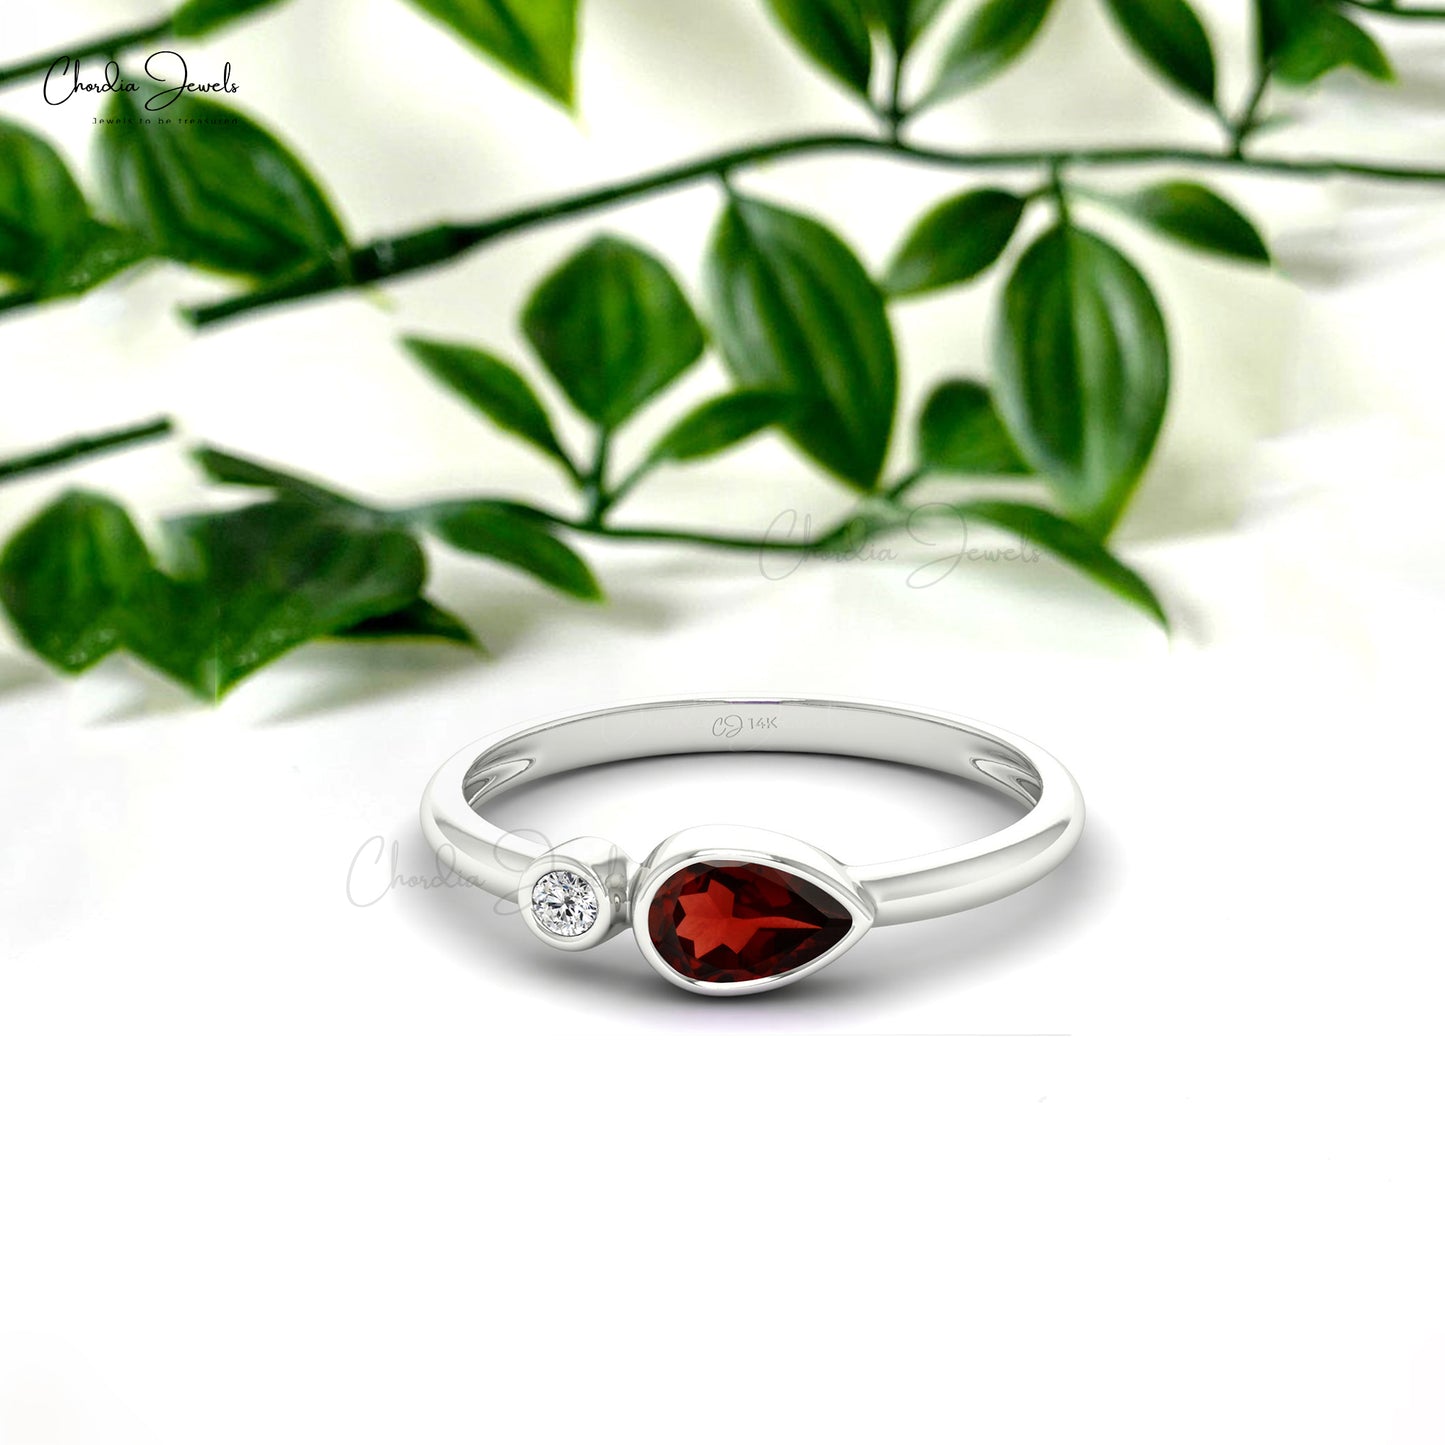 Natural Garnet 6x4mm Pear Cut Gemstone Engagement Ring 14k Real Gold Diamond Promise Ring For Her